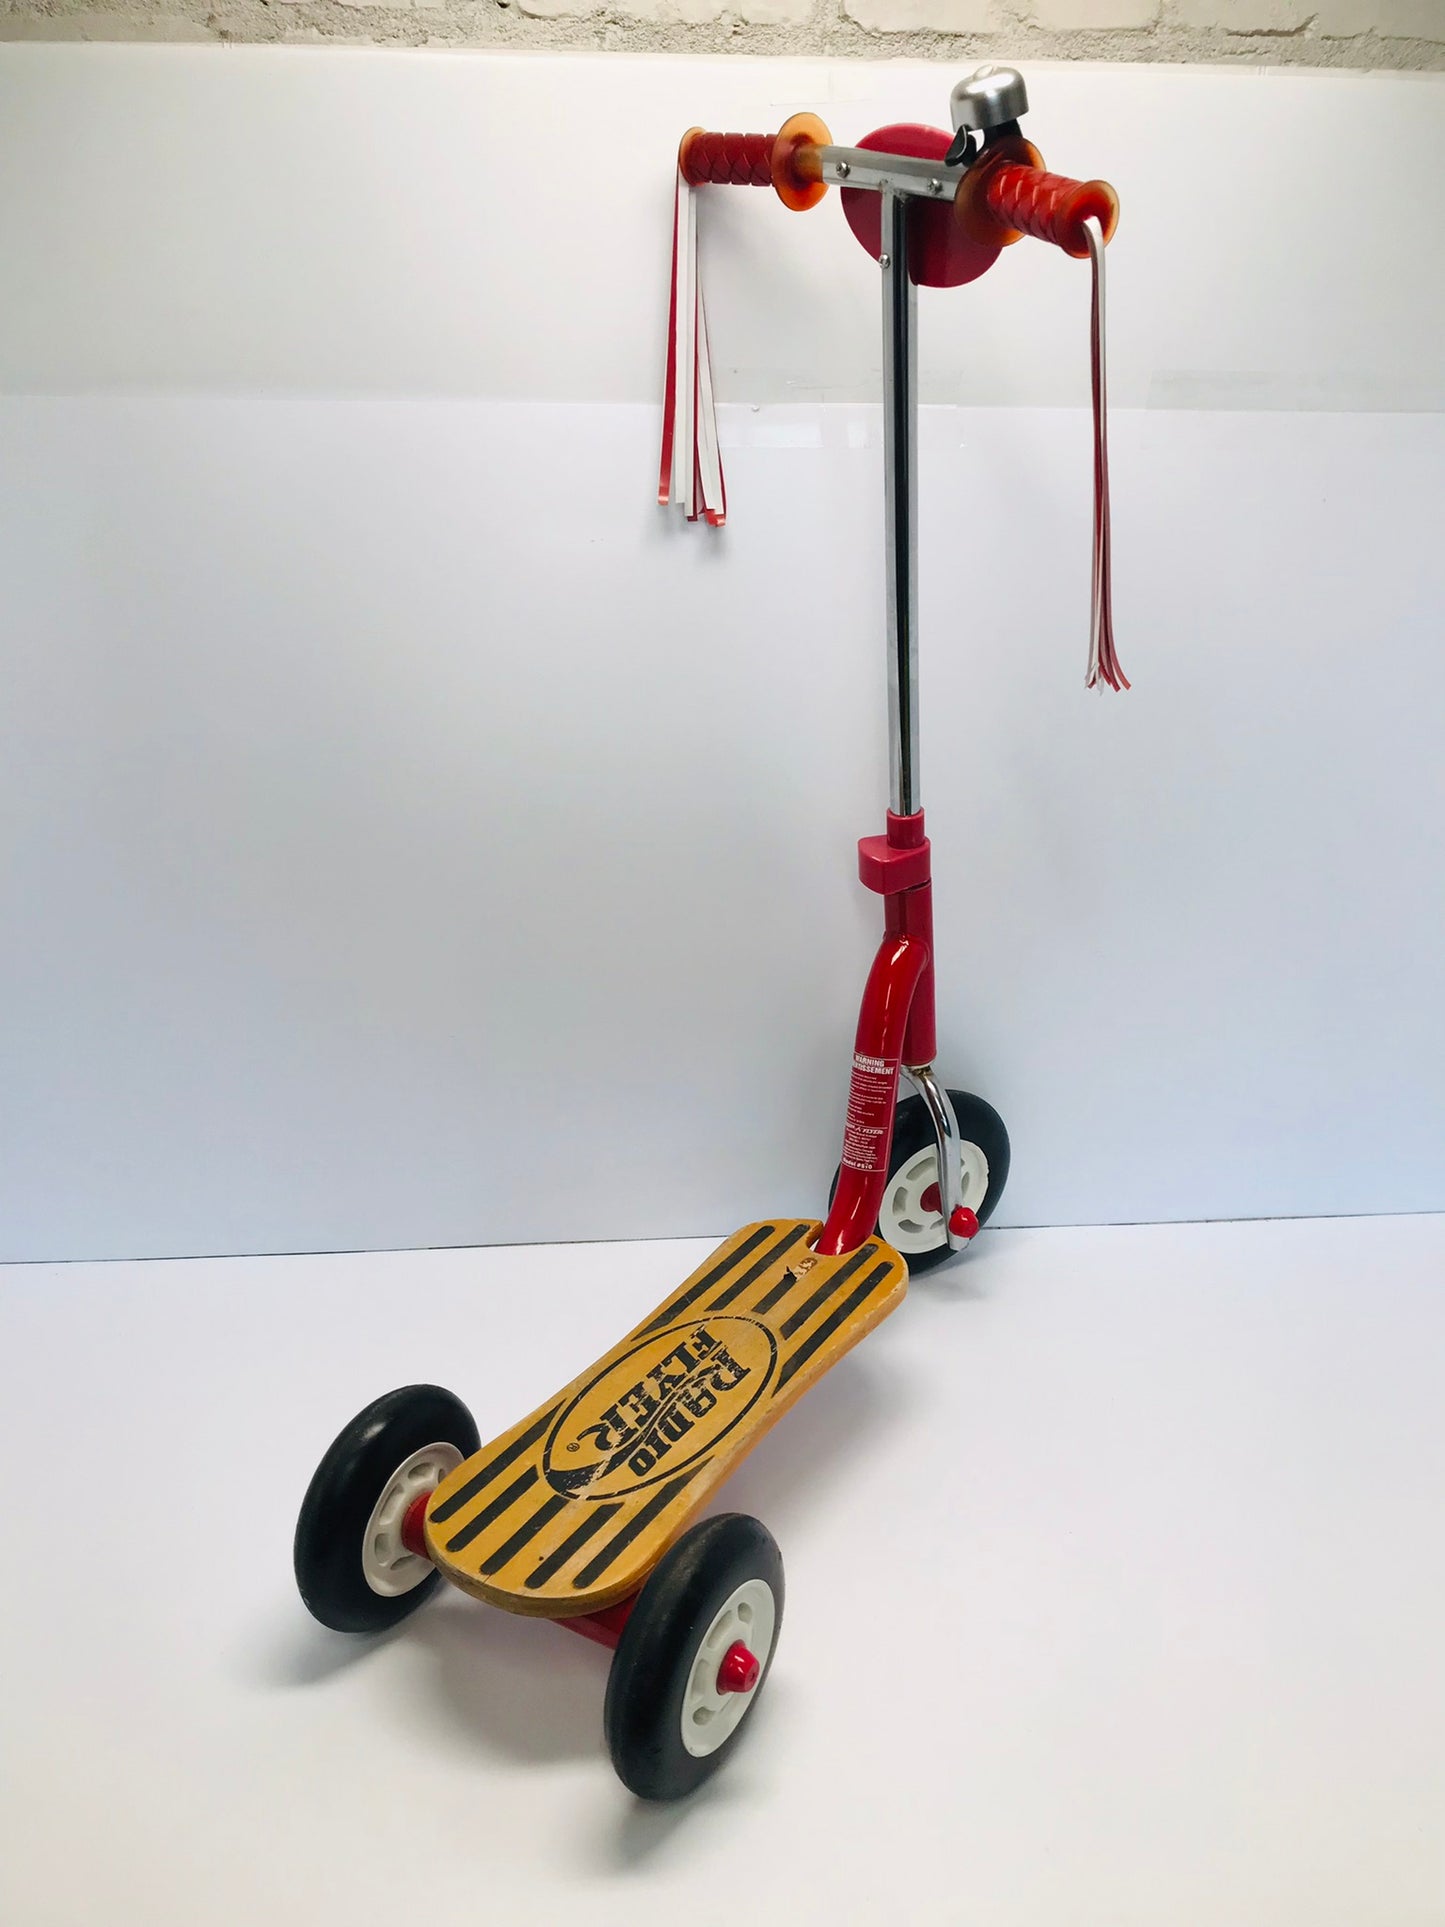 Children's Deluxe Radio Flyer Scooter Wood and Metal Adjustable Hight Bell and Streamers Like New